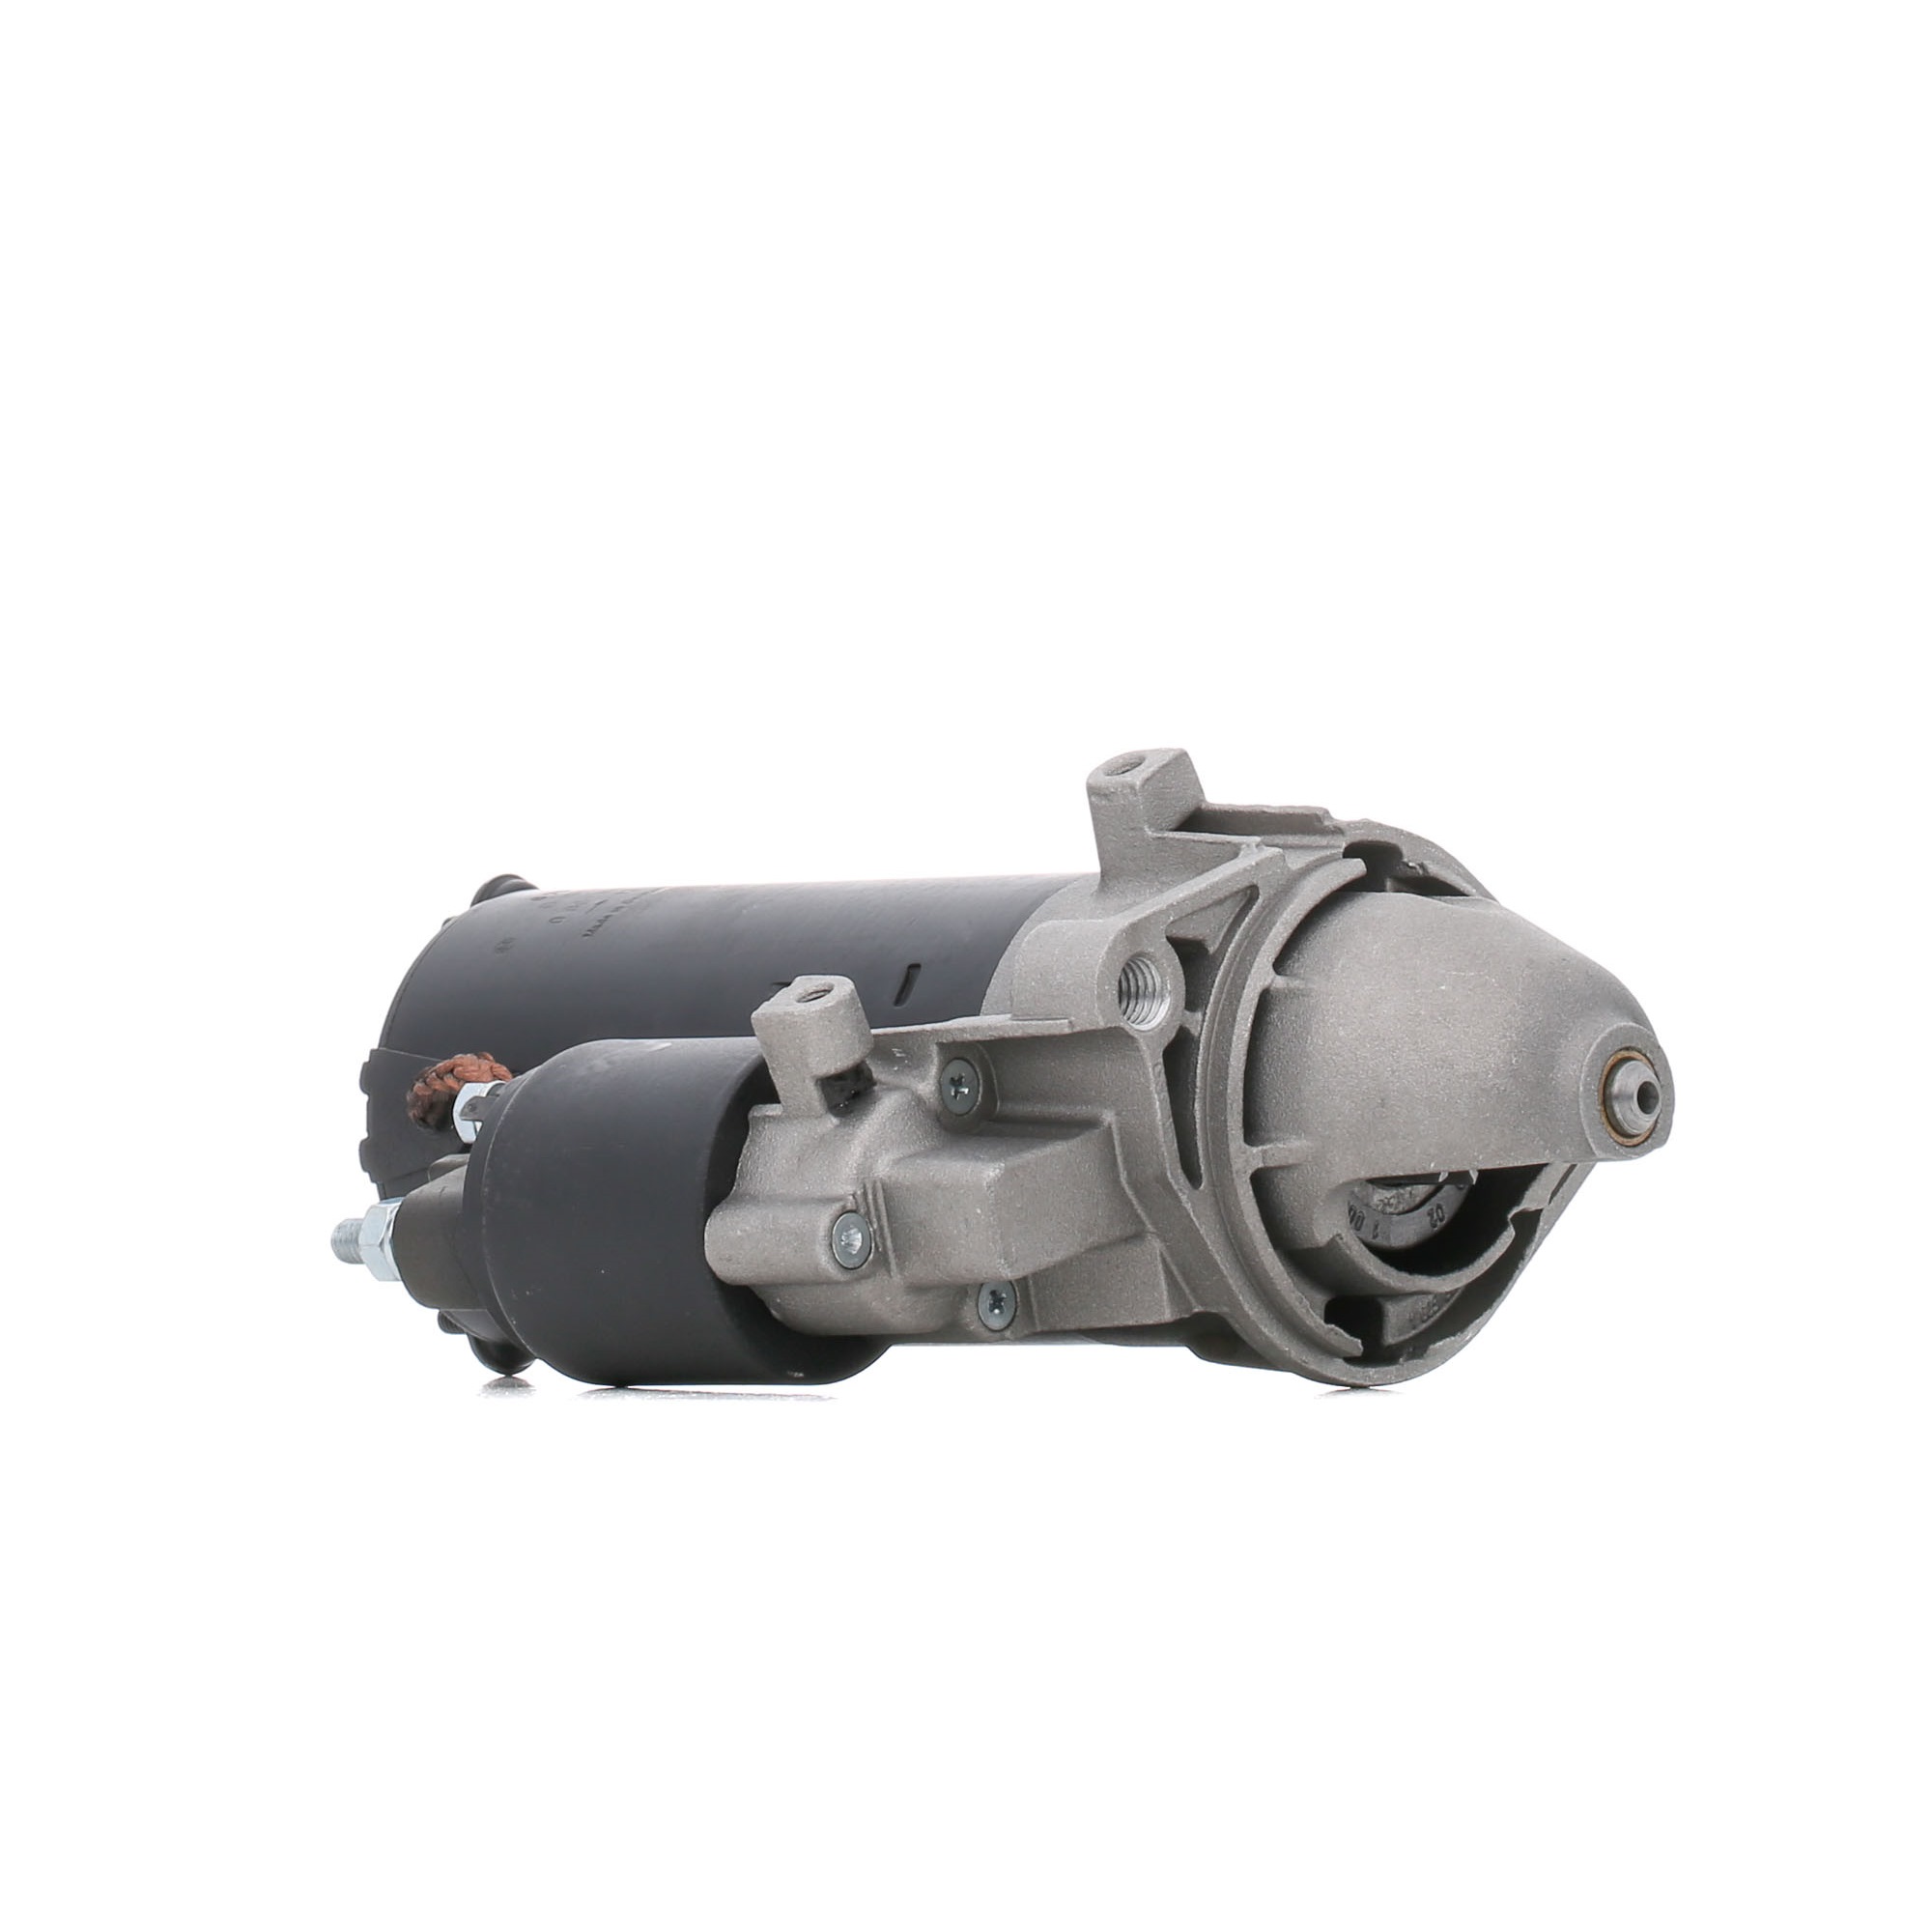 RIDEX REMAN 2S0260R Starter motor 12V, 1,7kW, 1,7kW, Number of Teeth: 9, B+(M8), with 50(Jet) clamp, Ø 82 mm